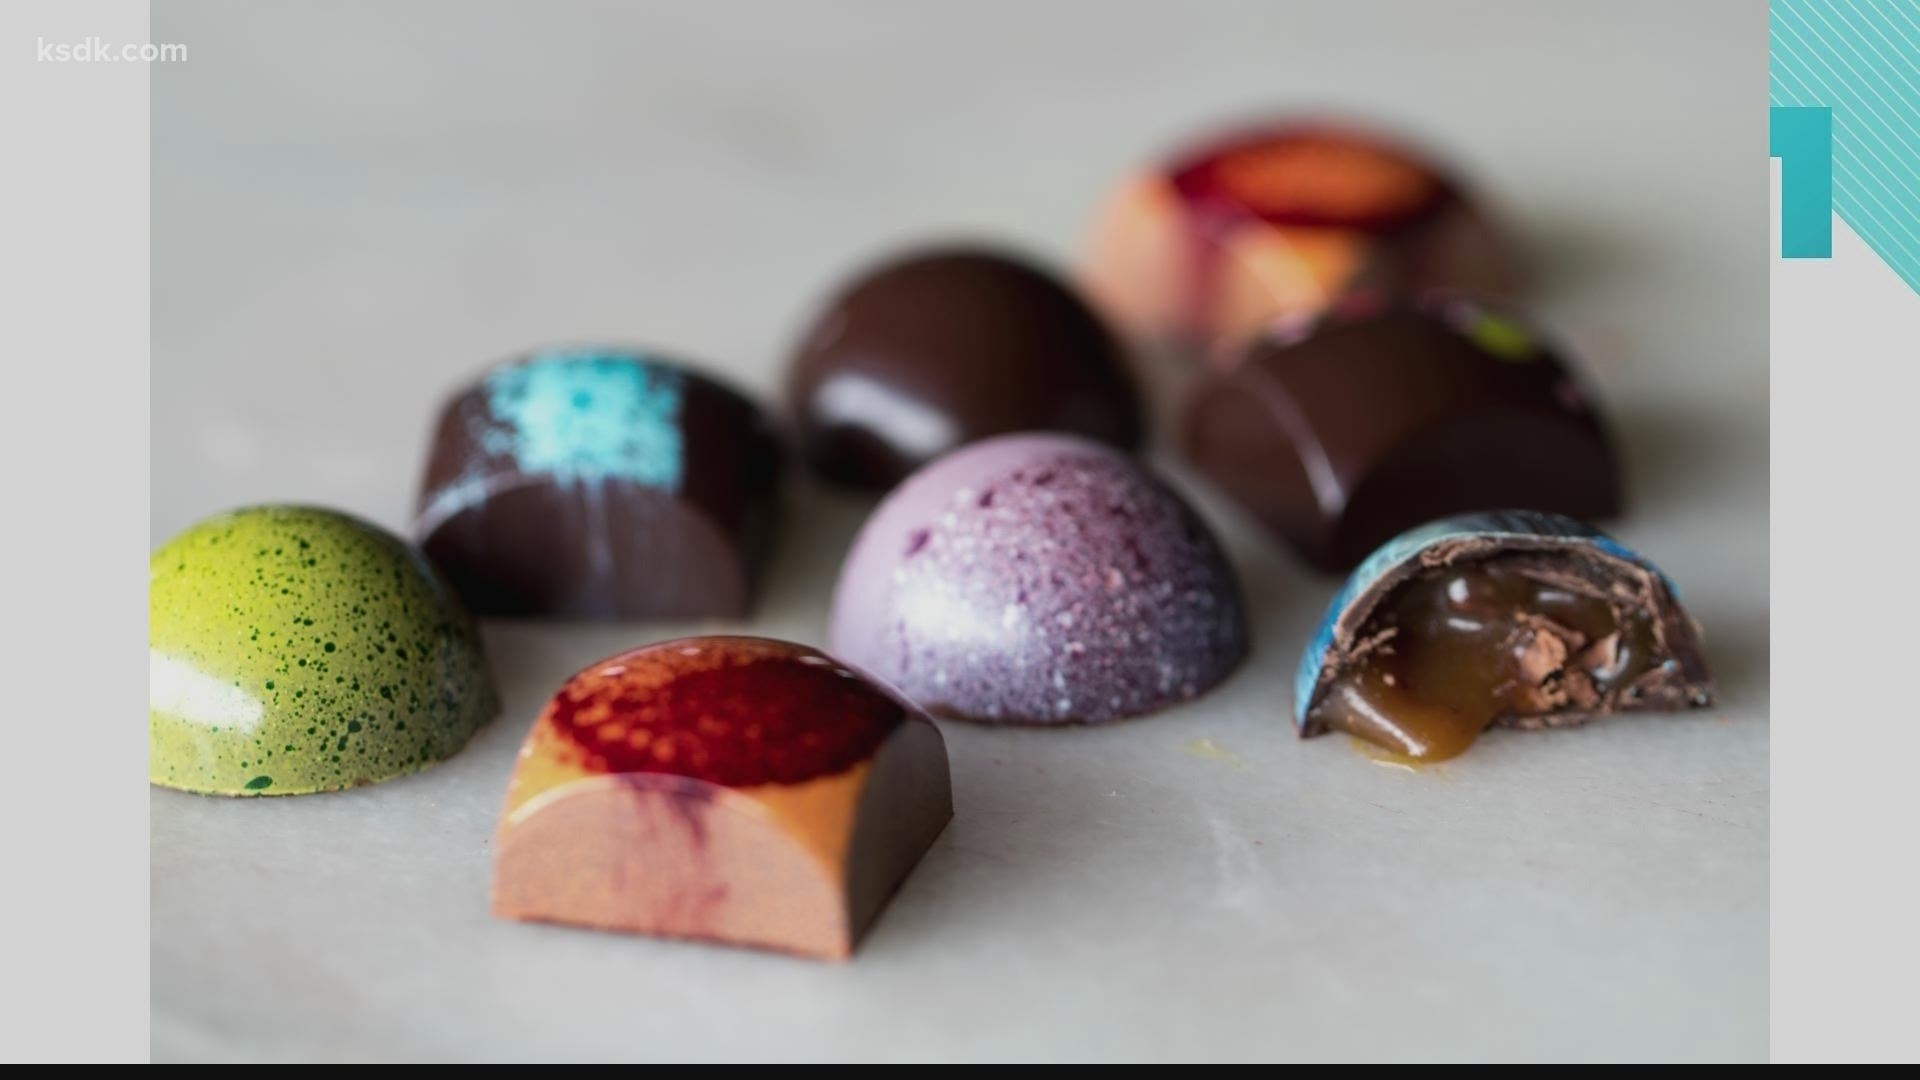 The chocolate boutique has a mixture of different flavors – some that are seasonal and rotating all the time.